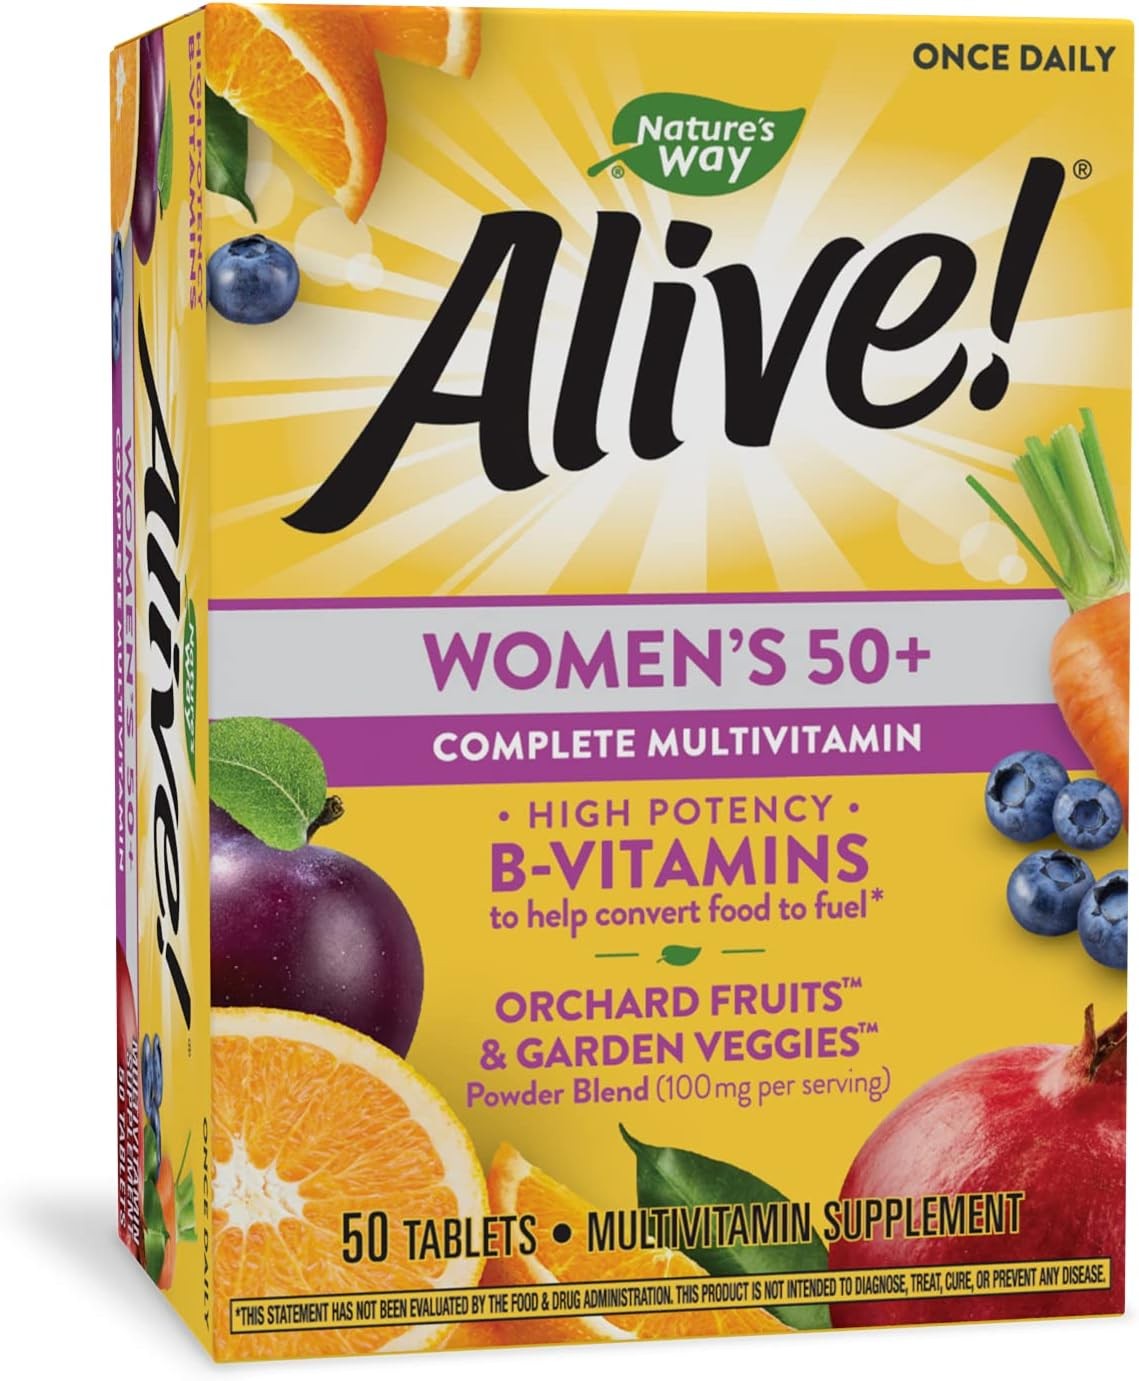 Nature’s Way Alive! Women’s 50+ Complete Multivitamin, High Potency B-Vitamins, 50 Tablets